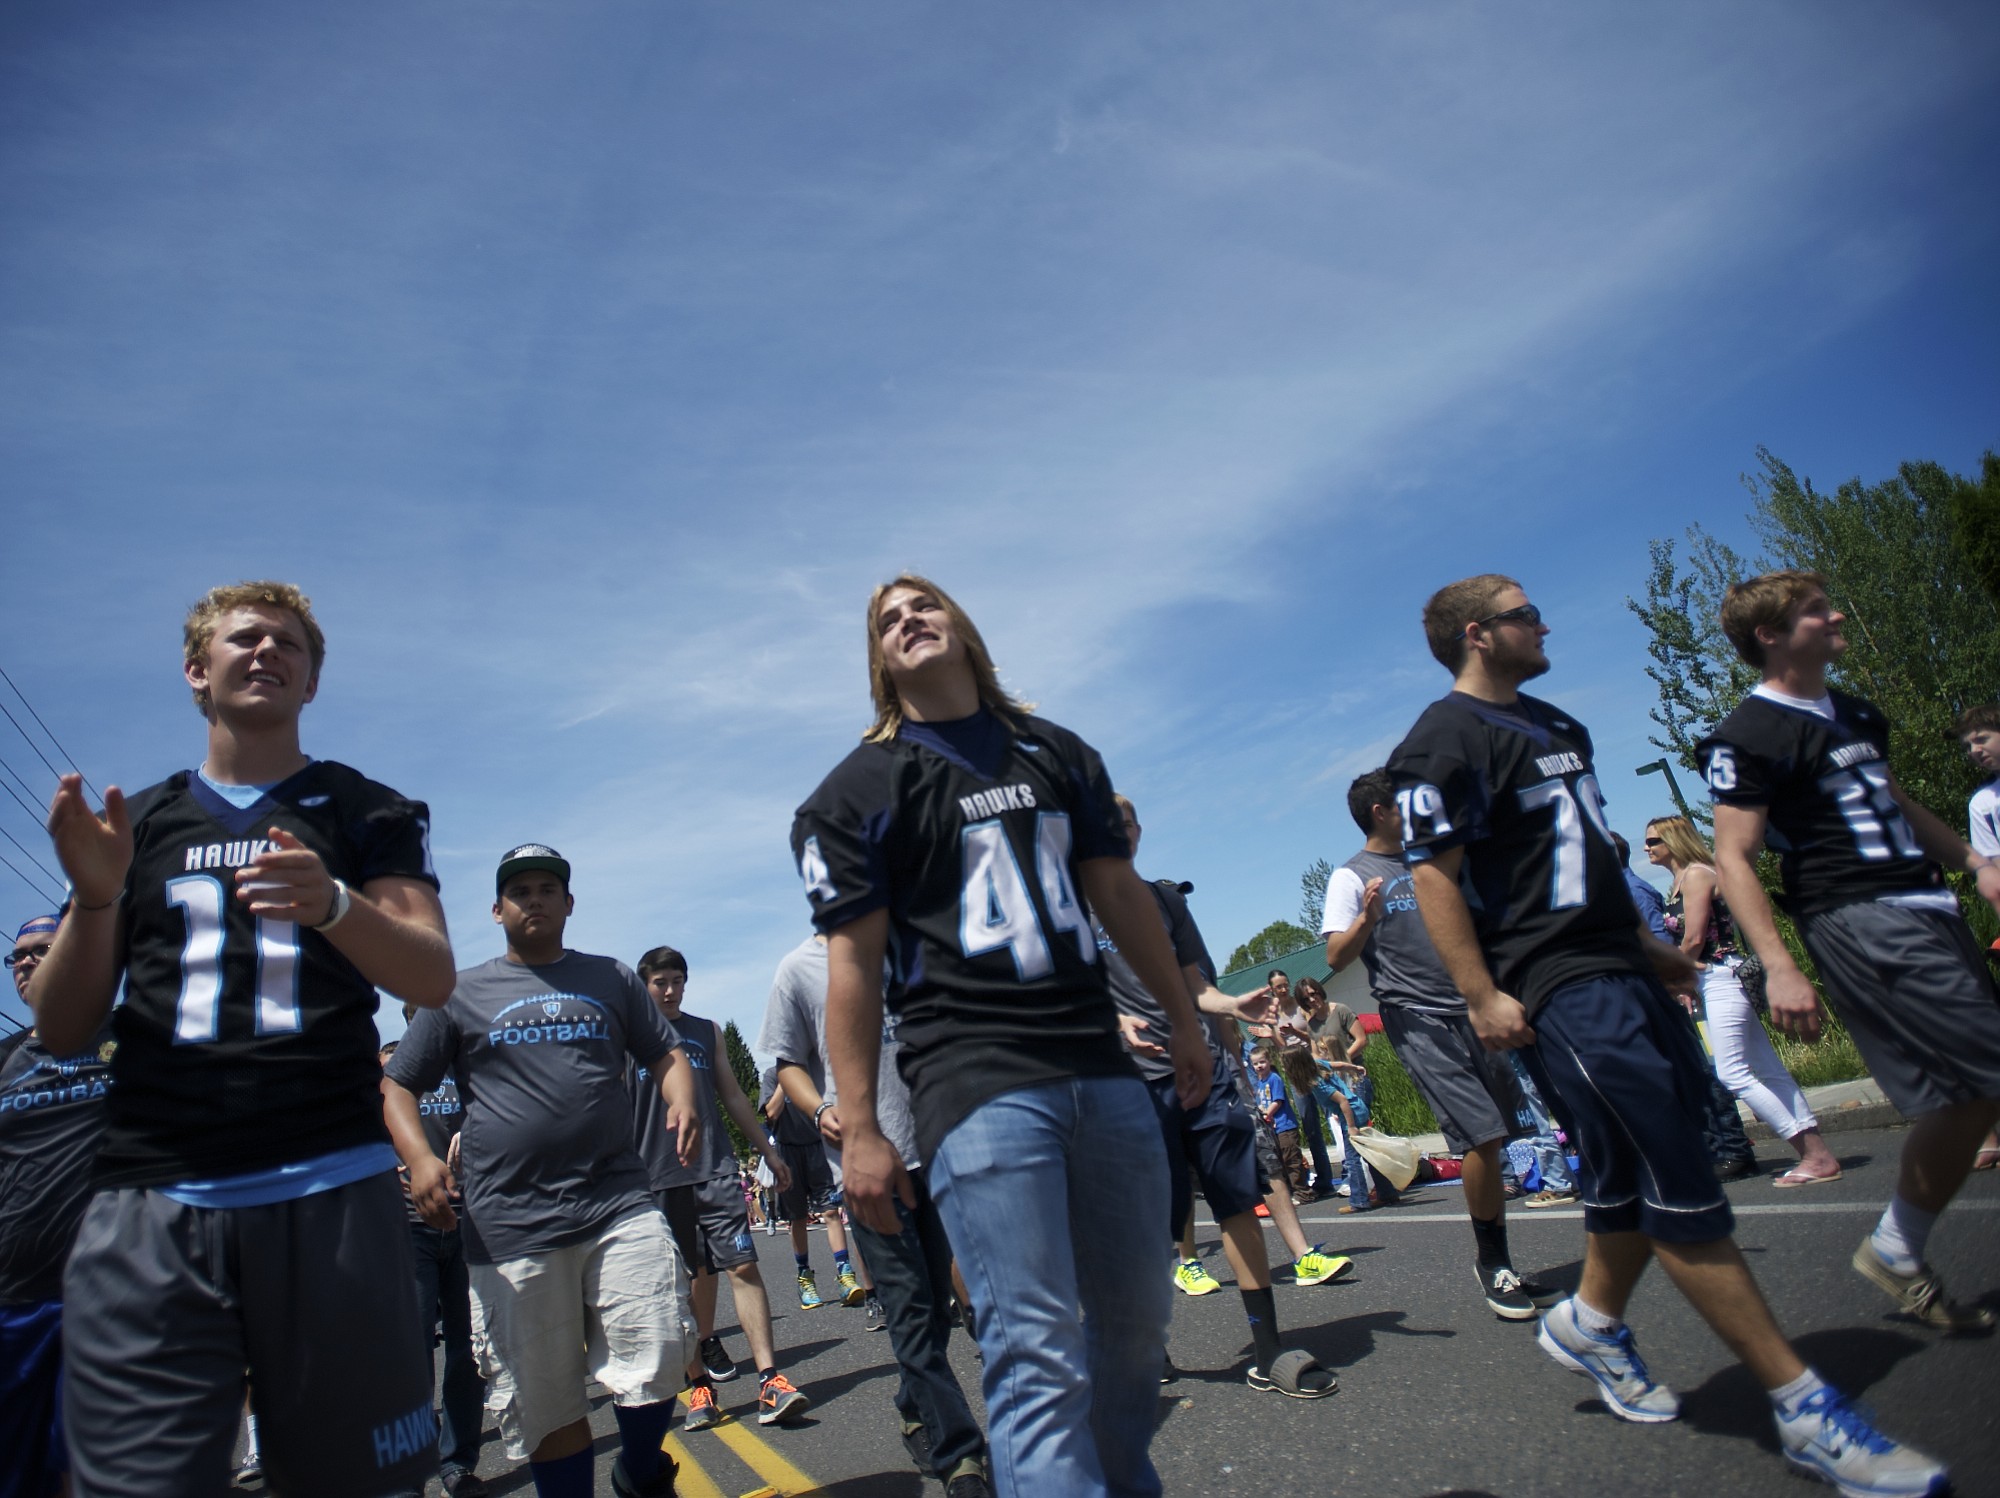 Members of the Hockinson High School football team march in the Hockinson Fun Days Parade to promote their upcoming season on Friday May 31, 2013.